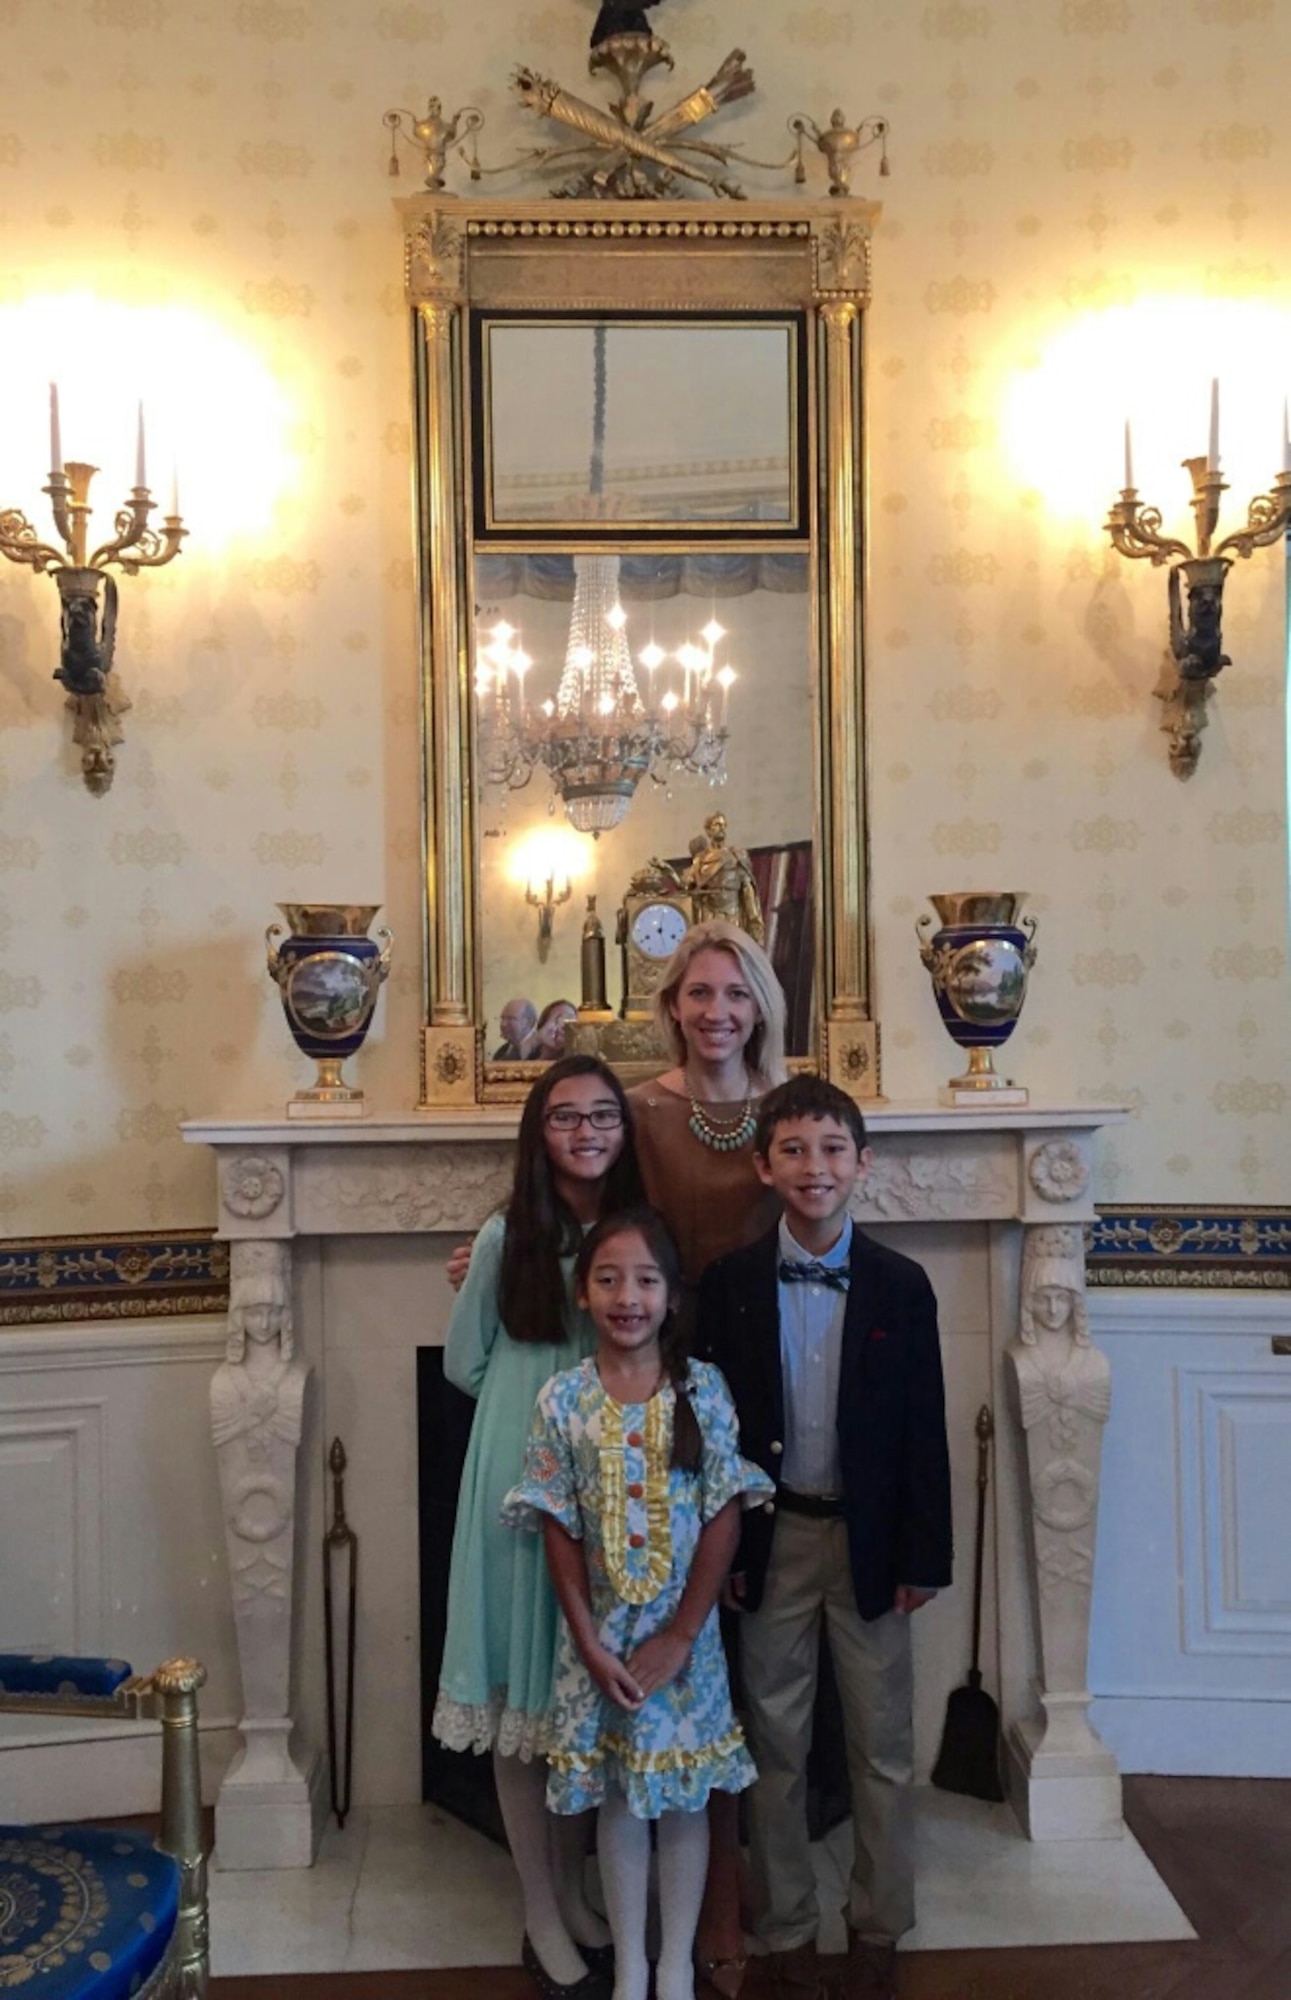 Heather Gray and her children, Nyah, Ava and Garrett, attend the Medal of Honor presentation for retired Army Capt. Florent Groberg at the White House Nov. 12, 2015. Groberg was with Heather’s husband, Maj. David Gray, when he was killed in action Aug. 8, 2012, during a deployment to Afghanistan. (Courtesy photo)